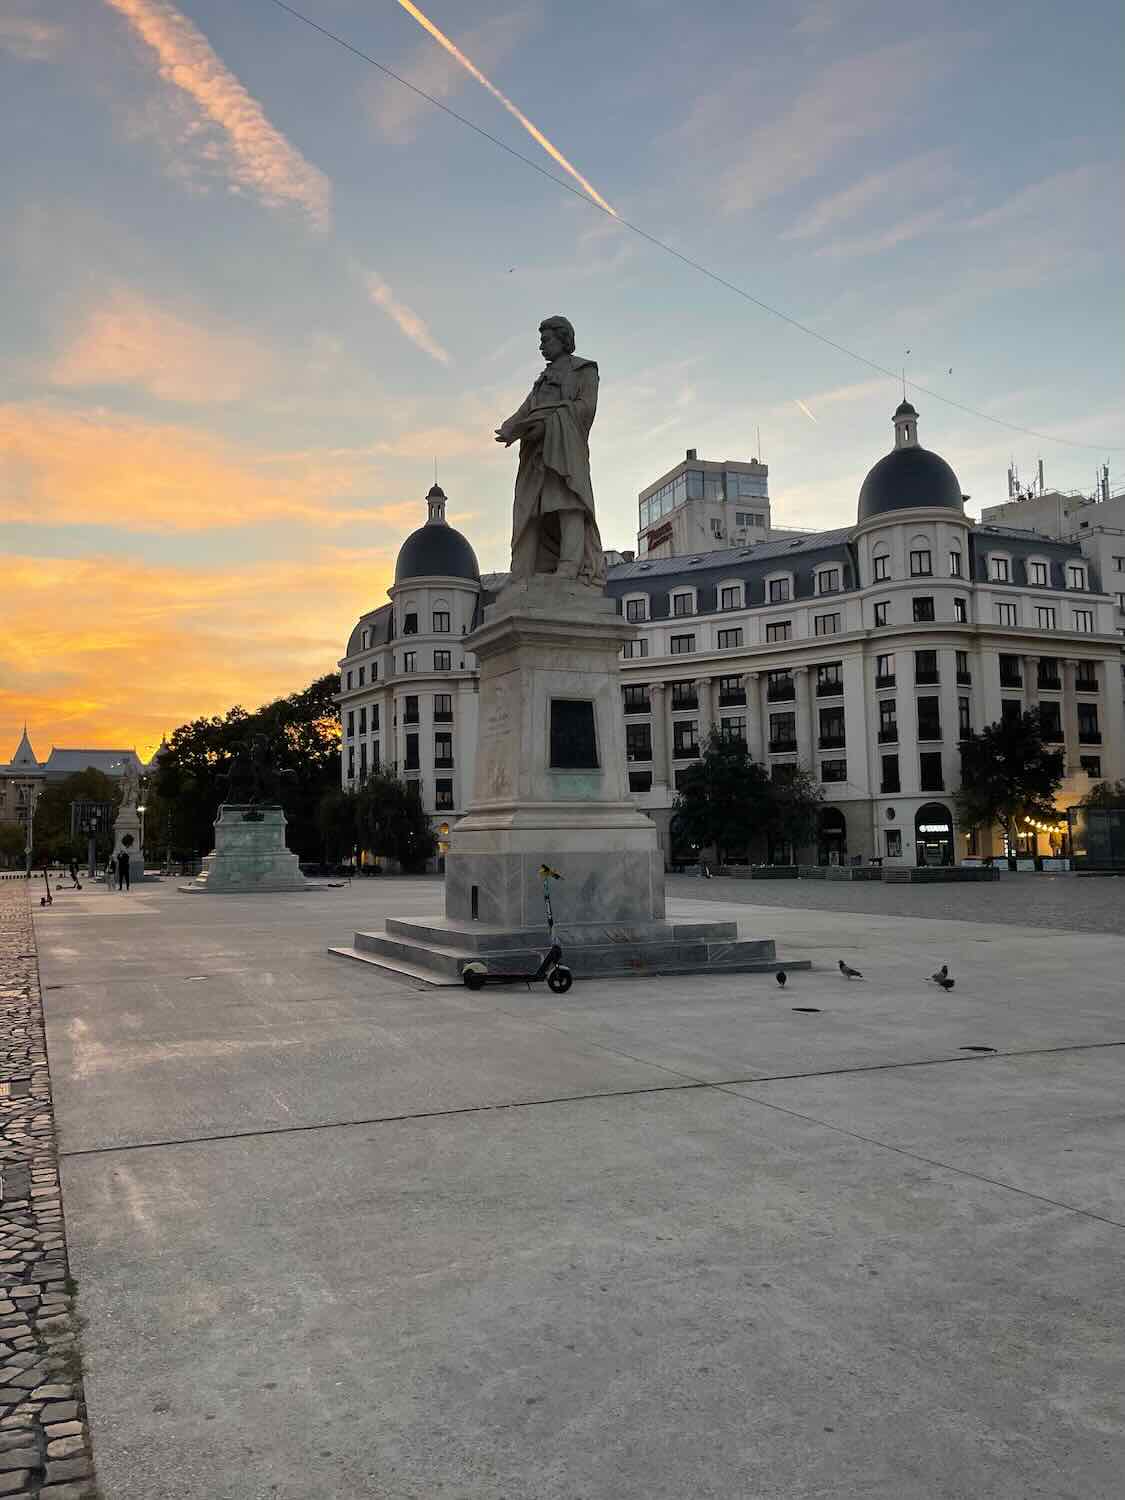 Dusk sets over Bucharest as the silhouette of a statue dominates the foreground and pastel-colored skies backdrop the city's architecture, with buildings and street lights beginning to glow.